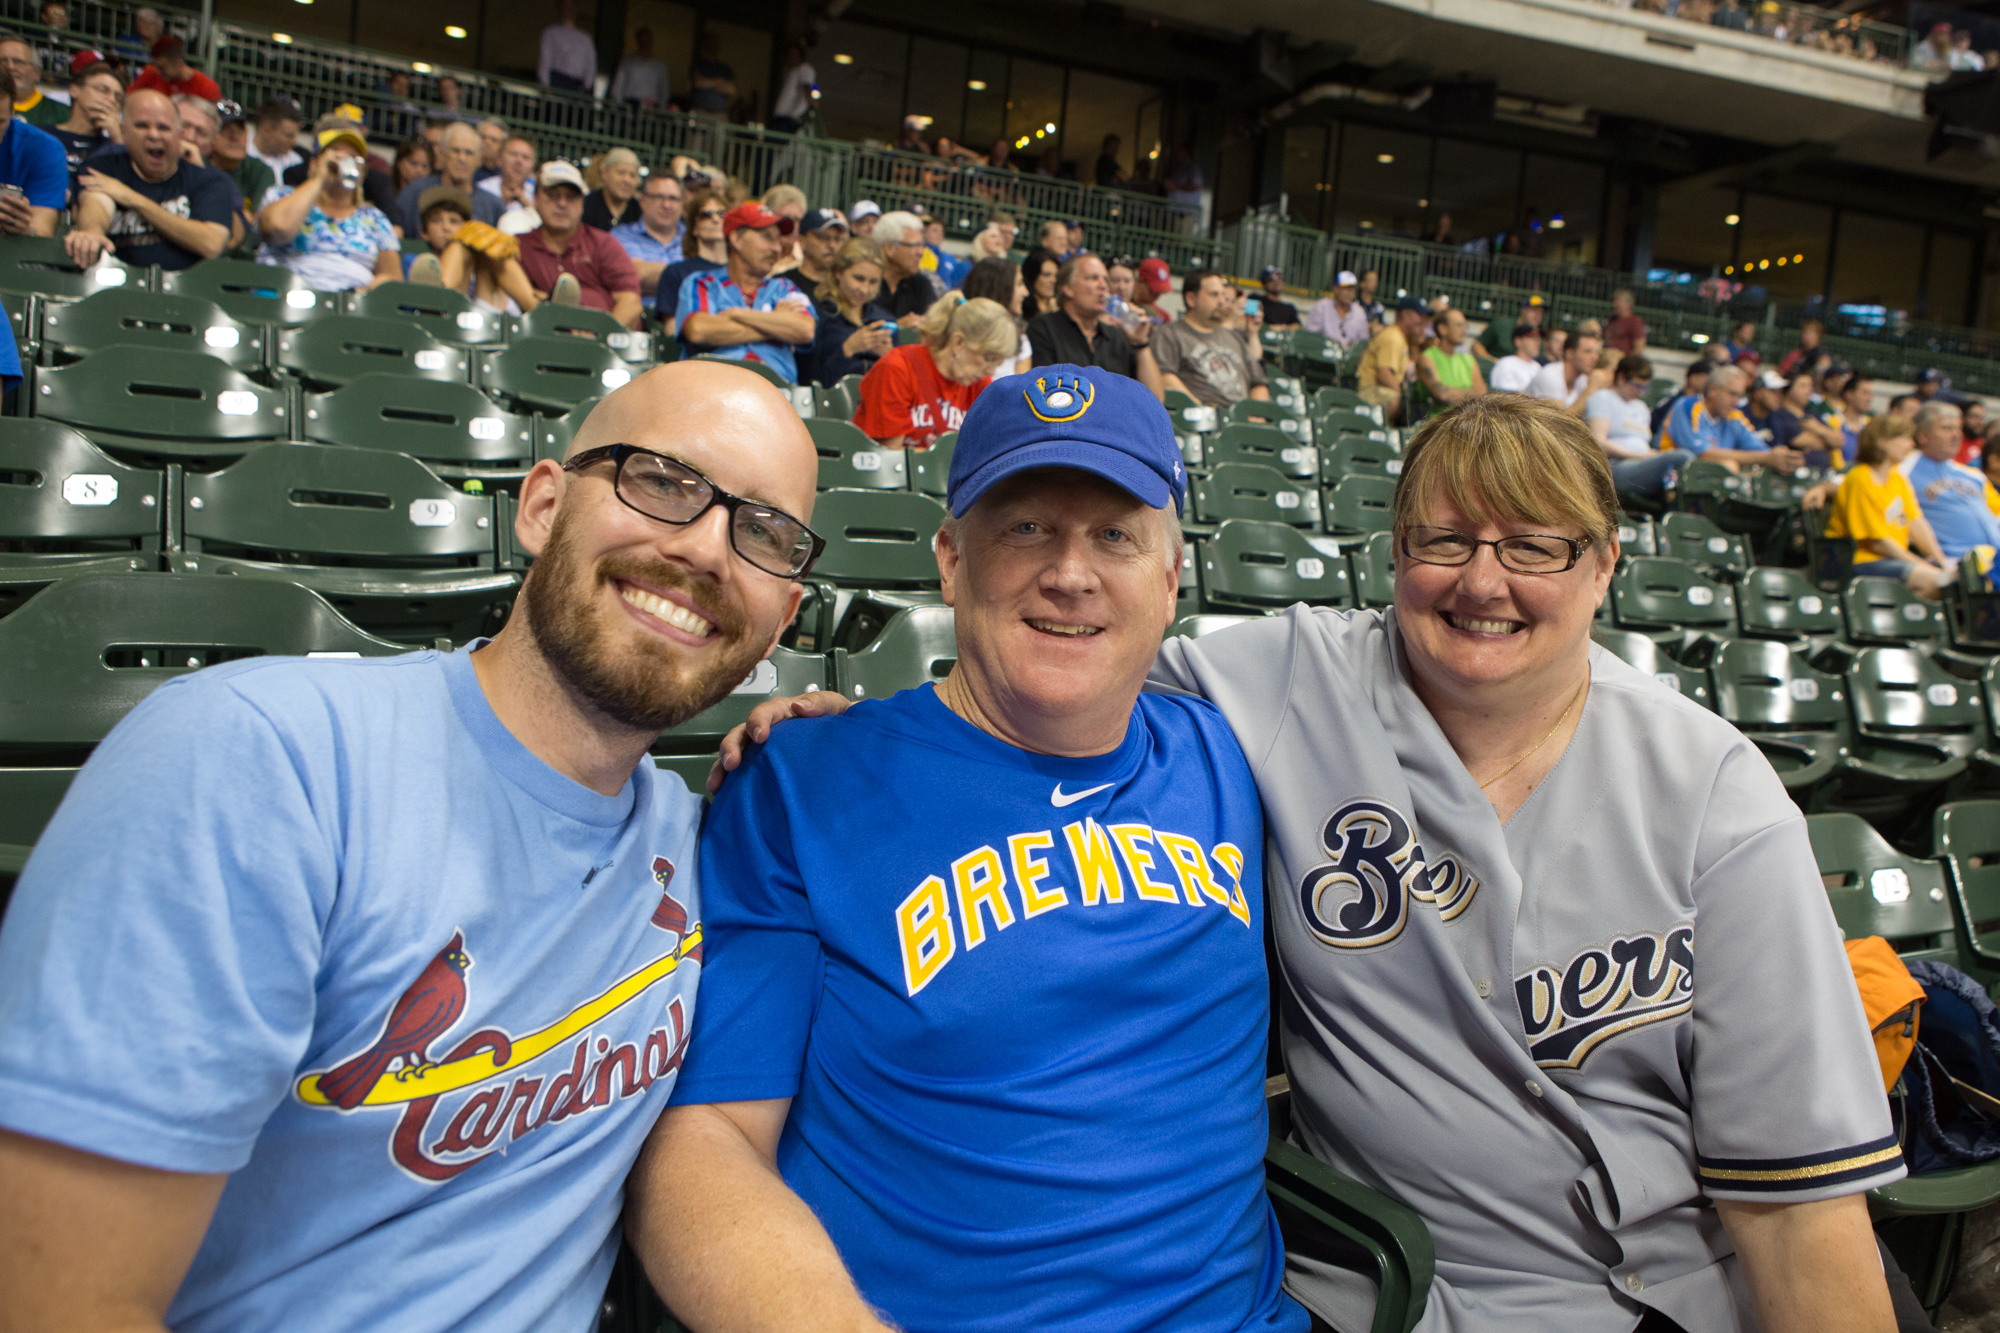  Lew and Carol have been great friends from our church. A surprise Brewers/Cardinals seat-upgrade from them made this night extra special. 